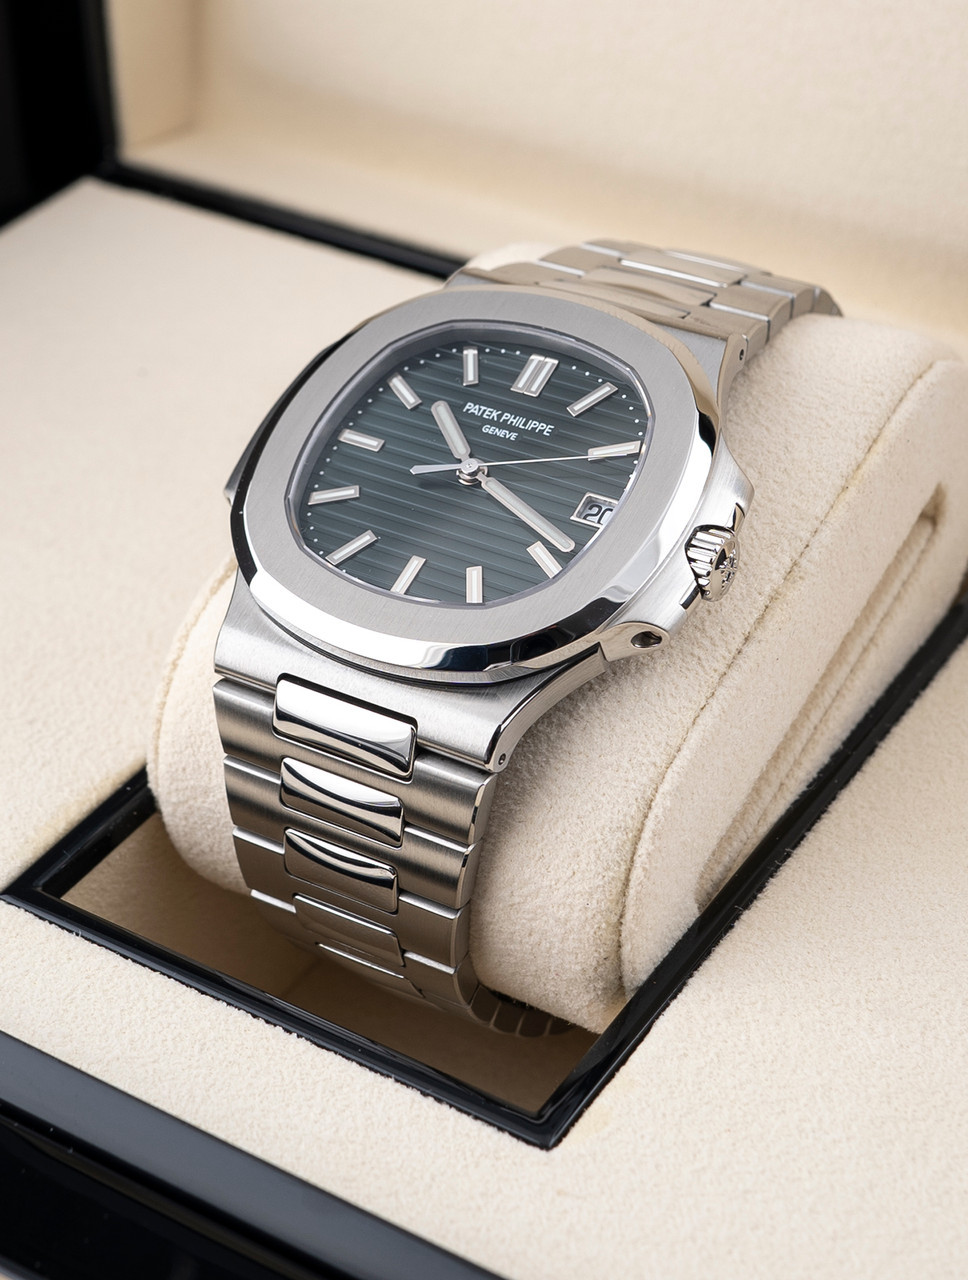 2021 Patek Philippe Nautilus Olive Green 5711/1A-014 Patek Philippe Watch  Review 